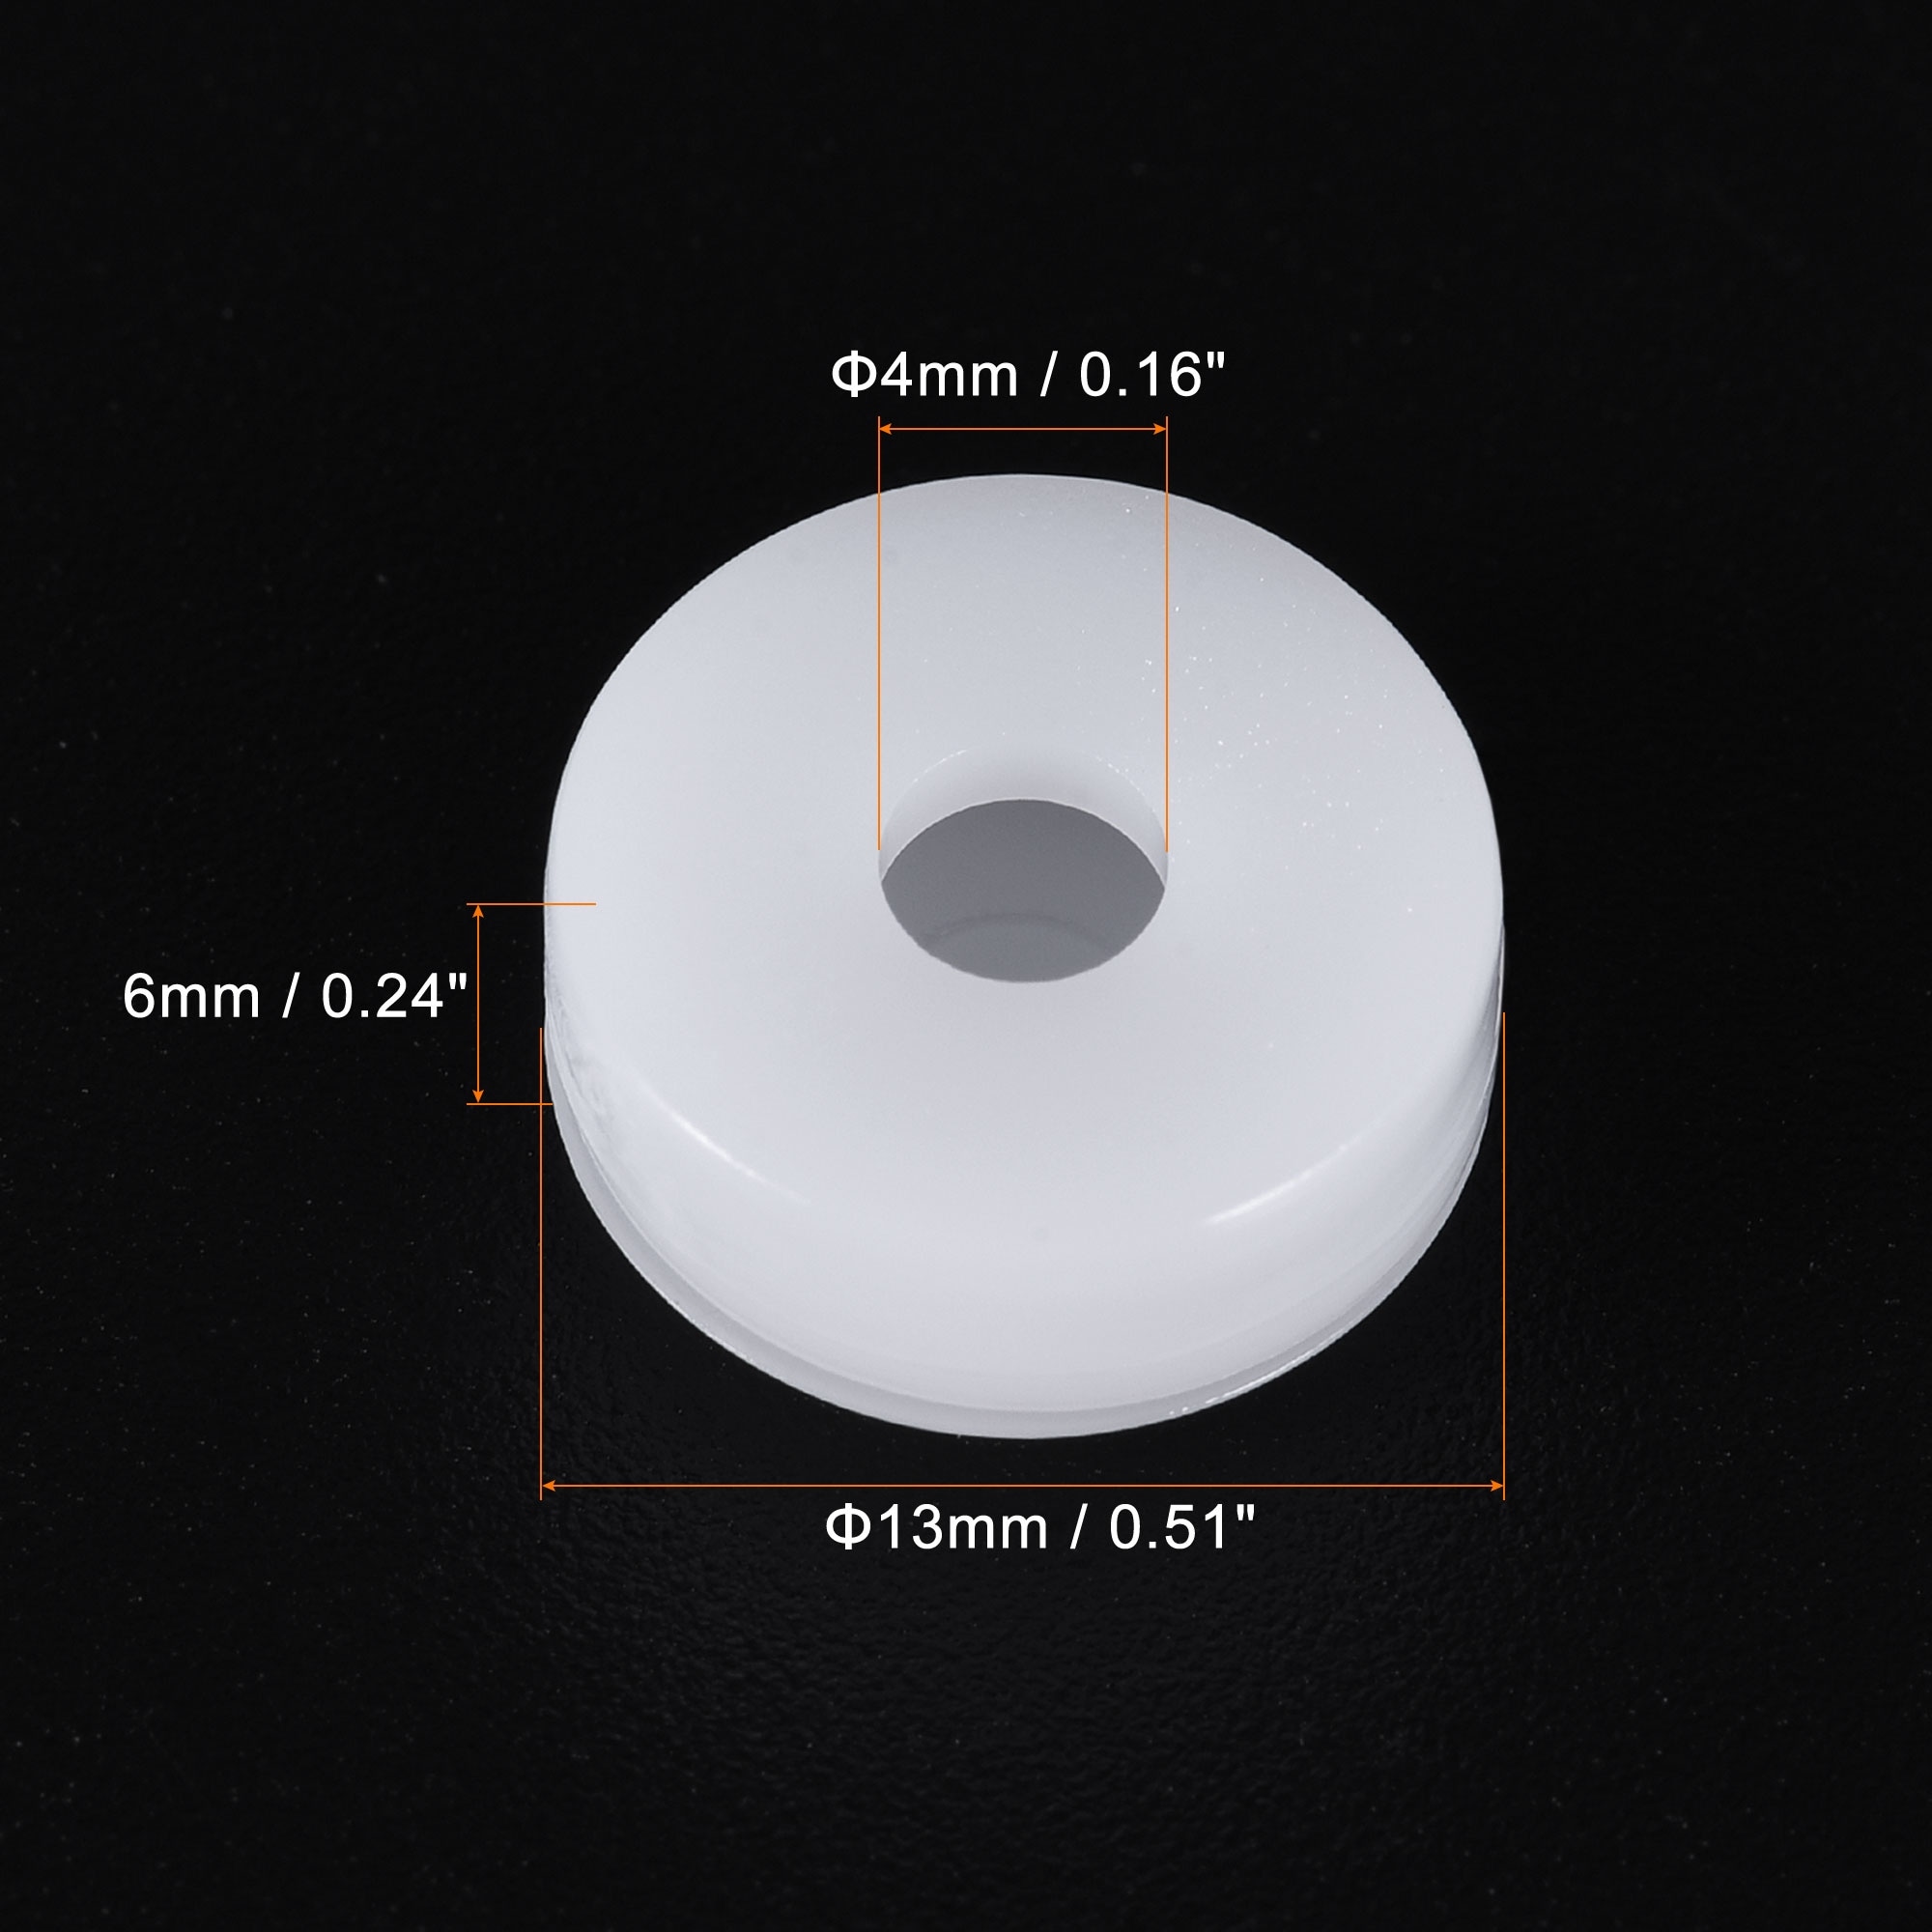 Hinged Screw Cover Caps, Plastic Screw Snap Covers - 4mm - White